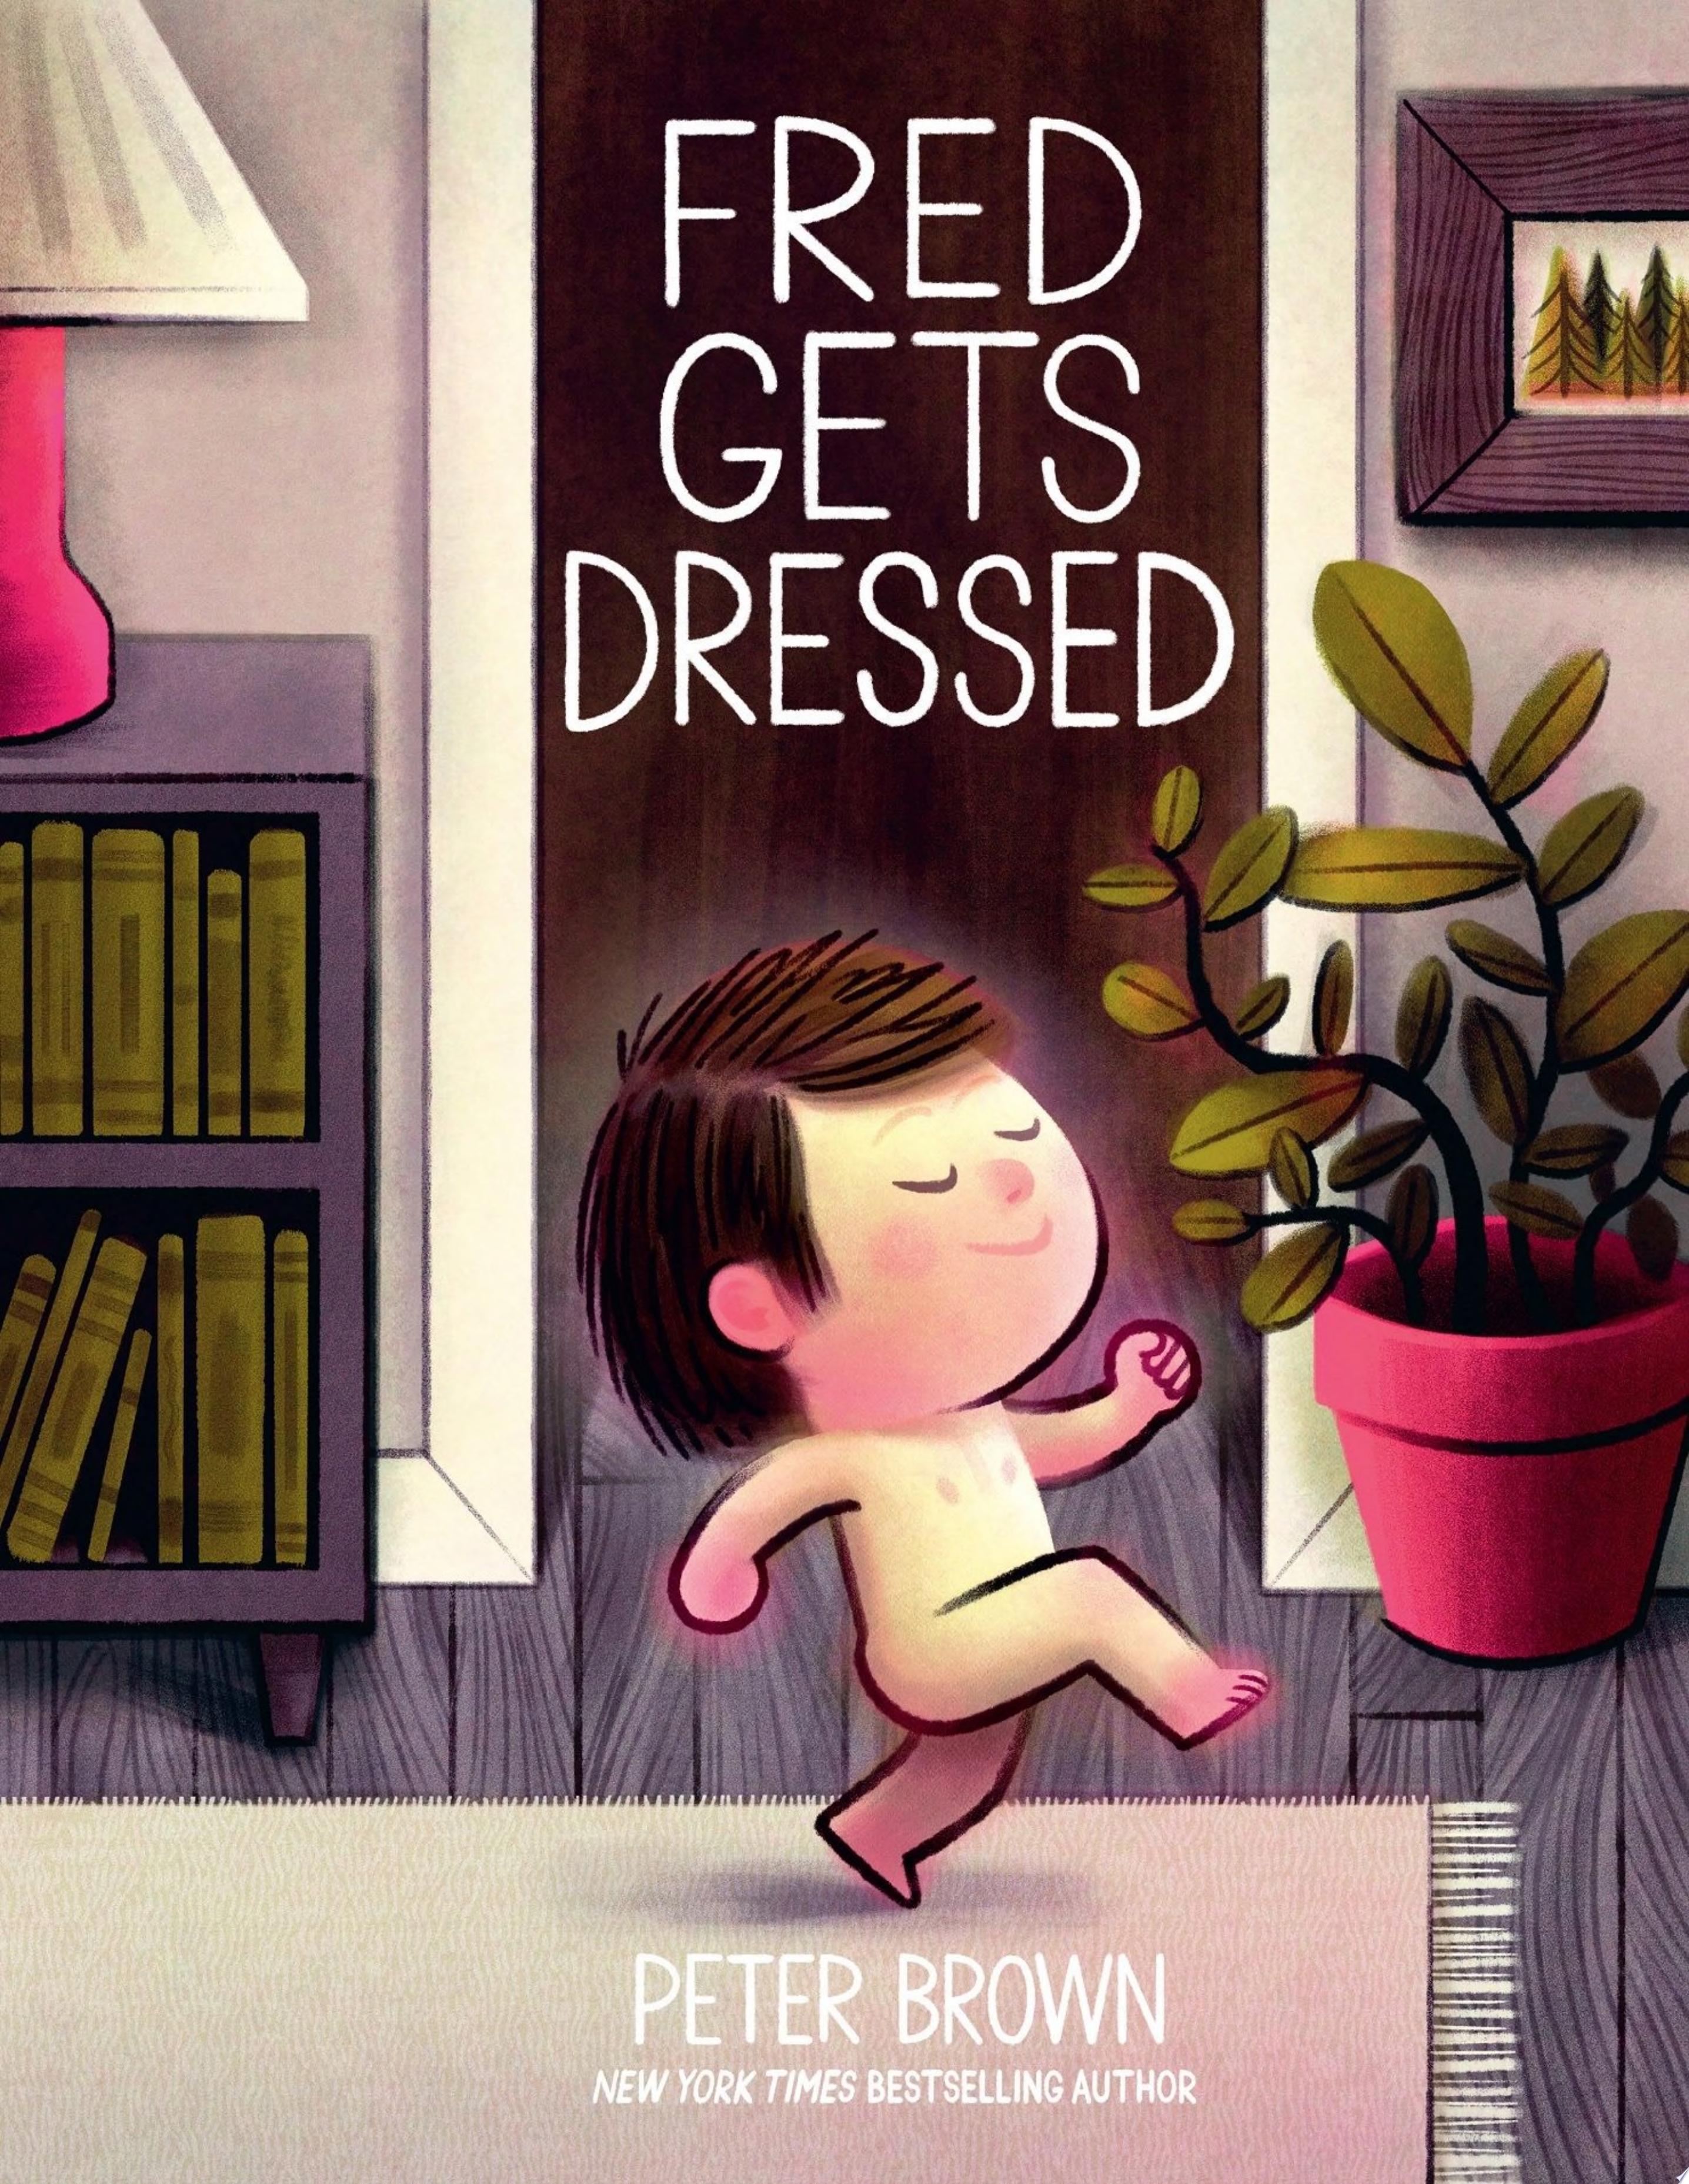 Image for "Fred Gets Dressed"